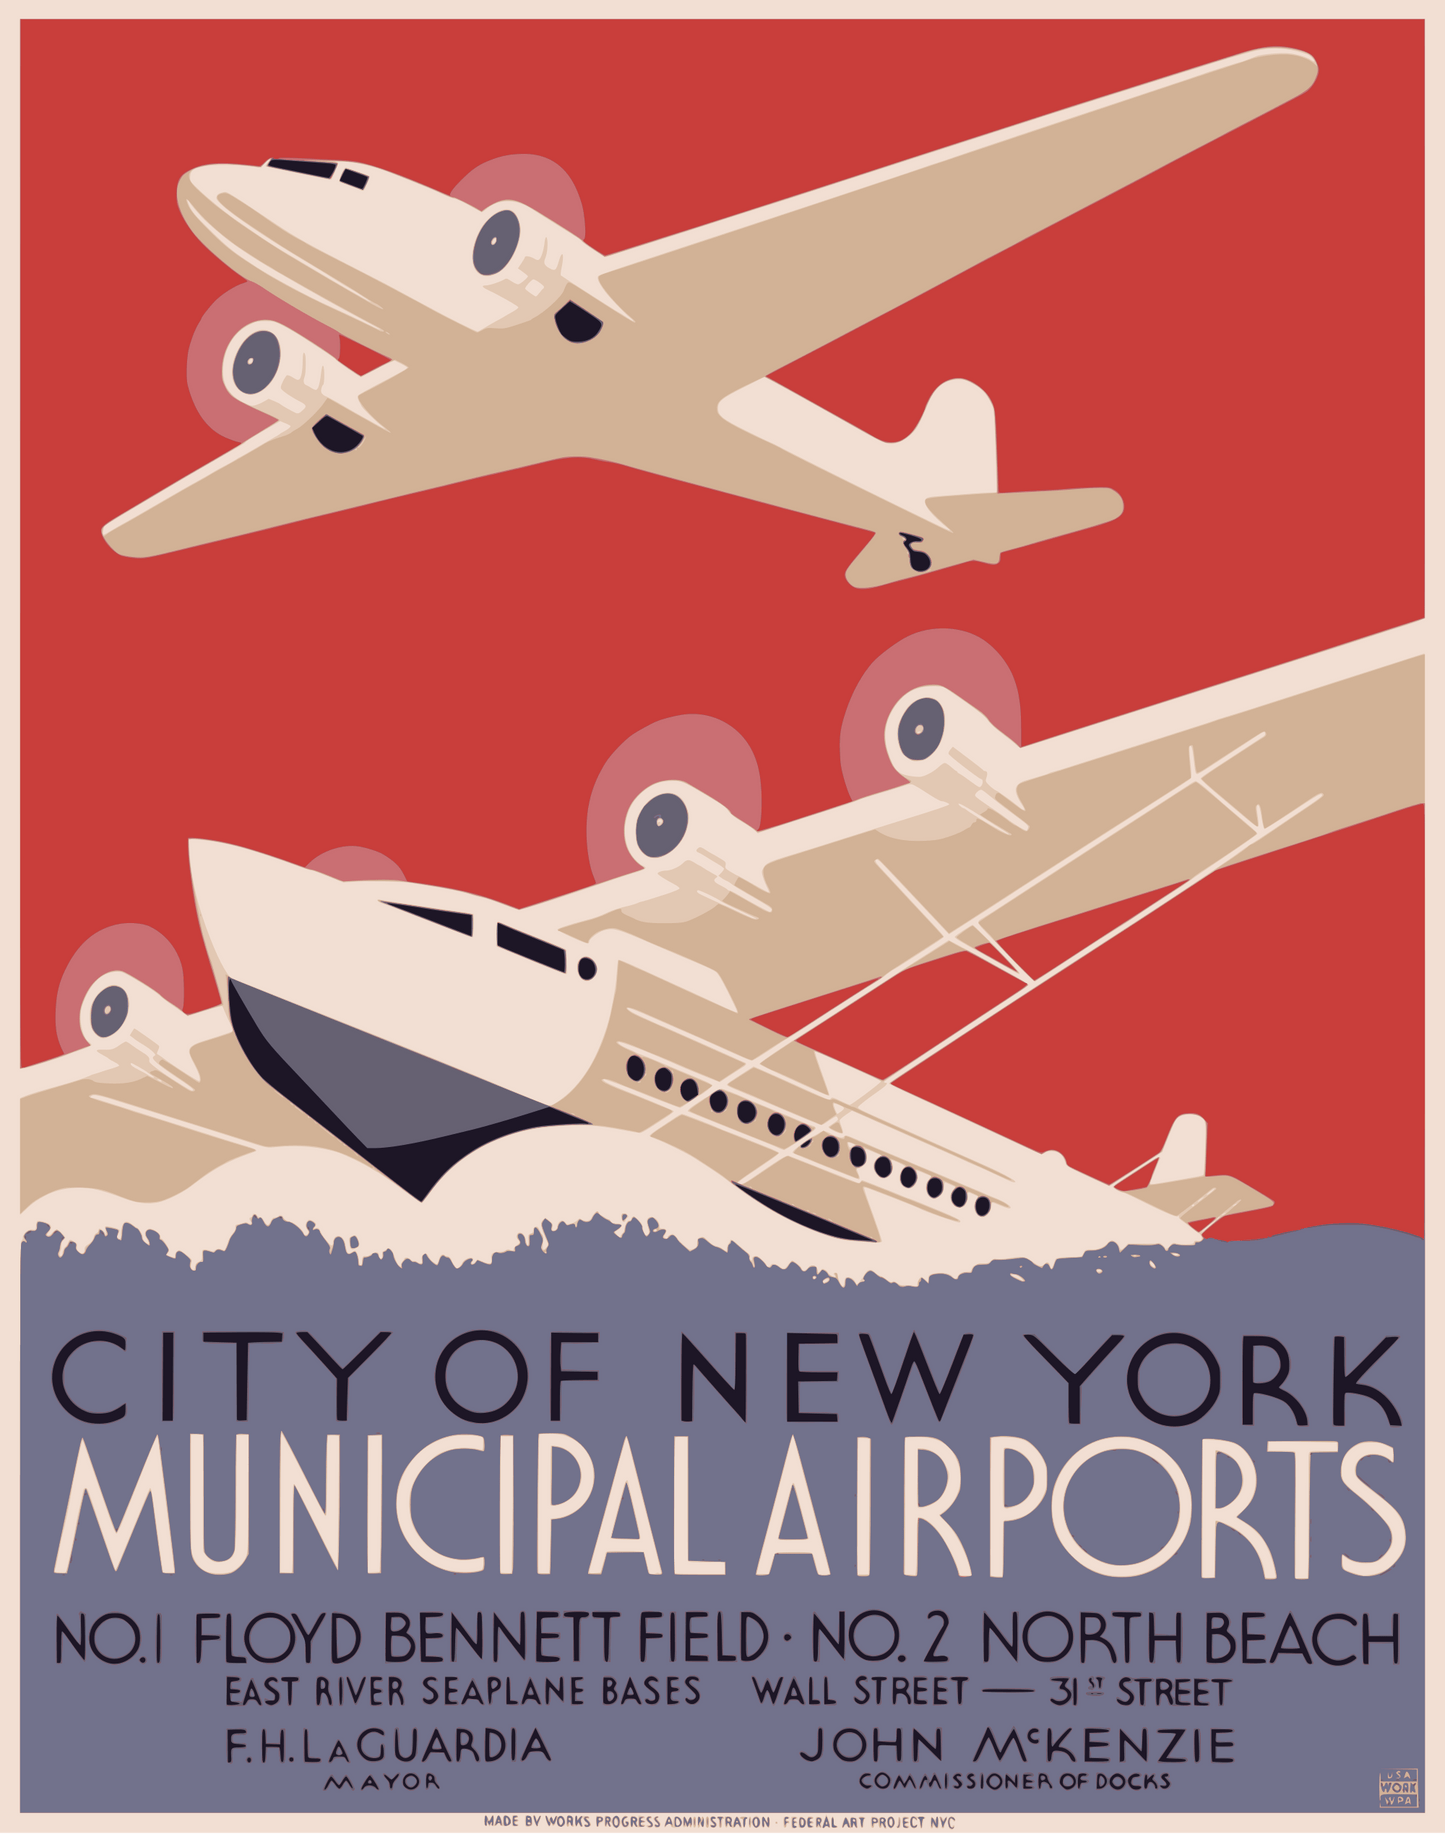 New York Airports Poster (1930s) | Harry Herzog prints Posters, Prints, & Visual Artwork The Trumpet Shop   